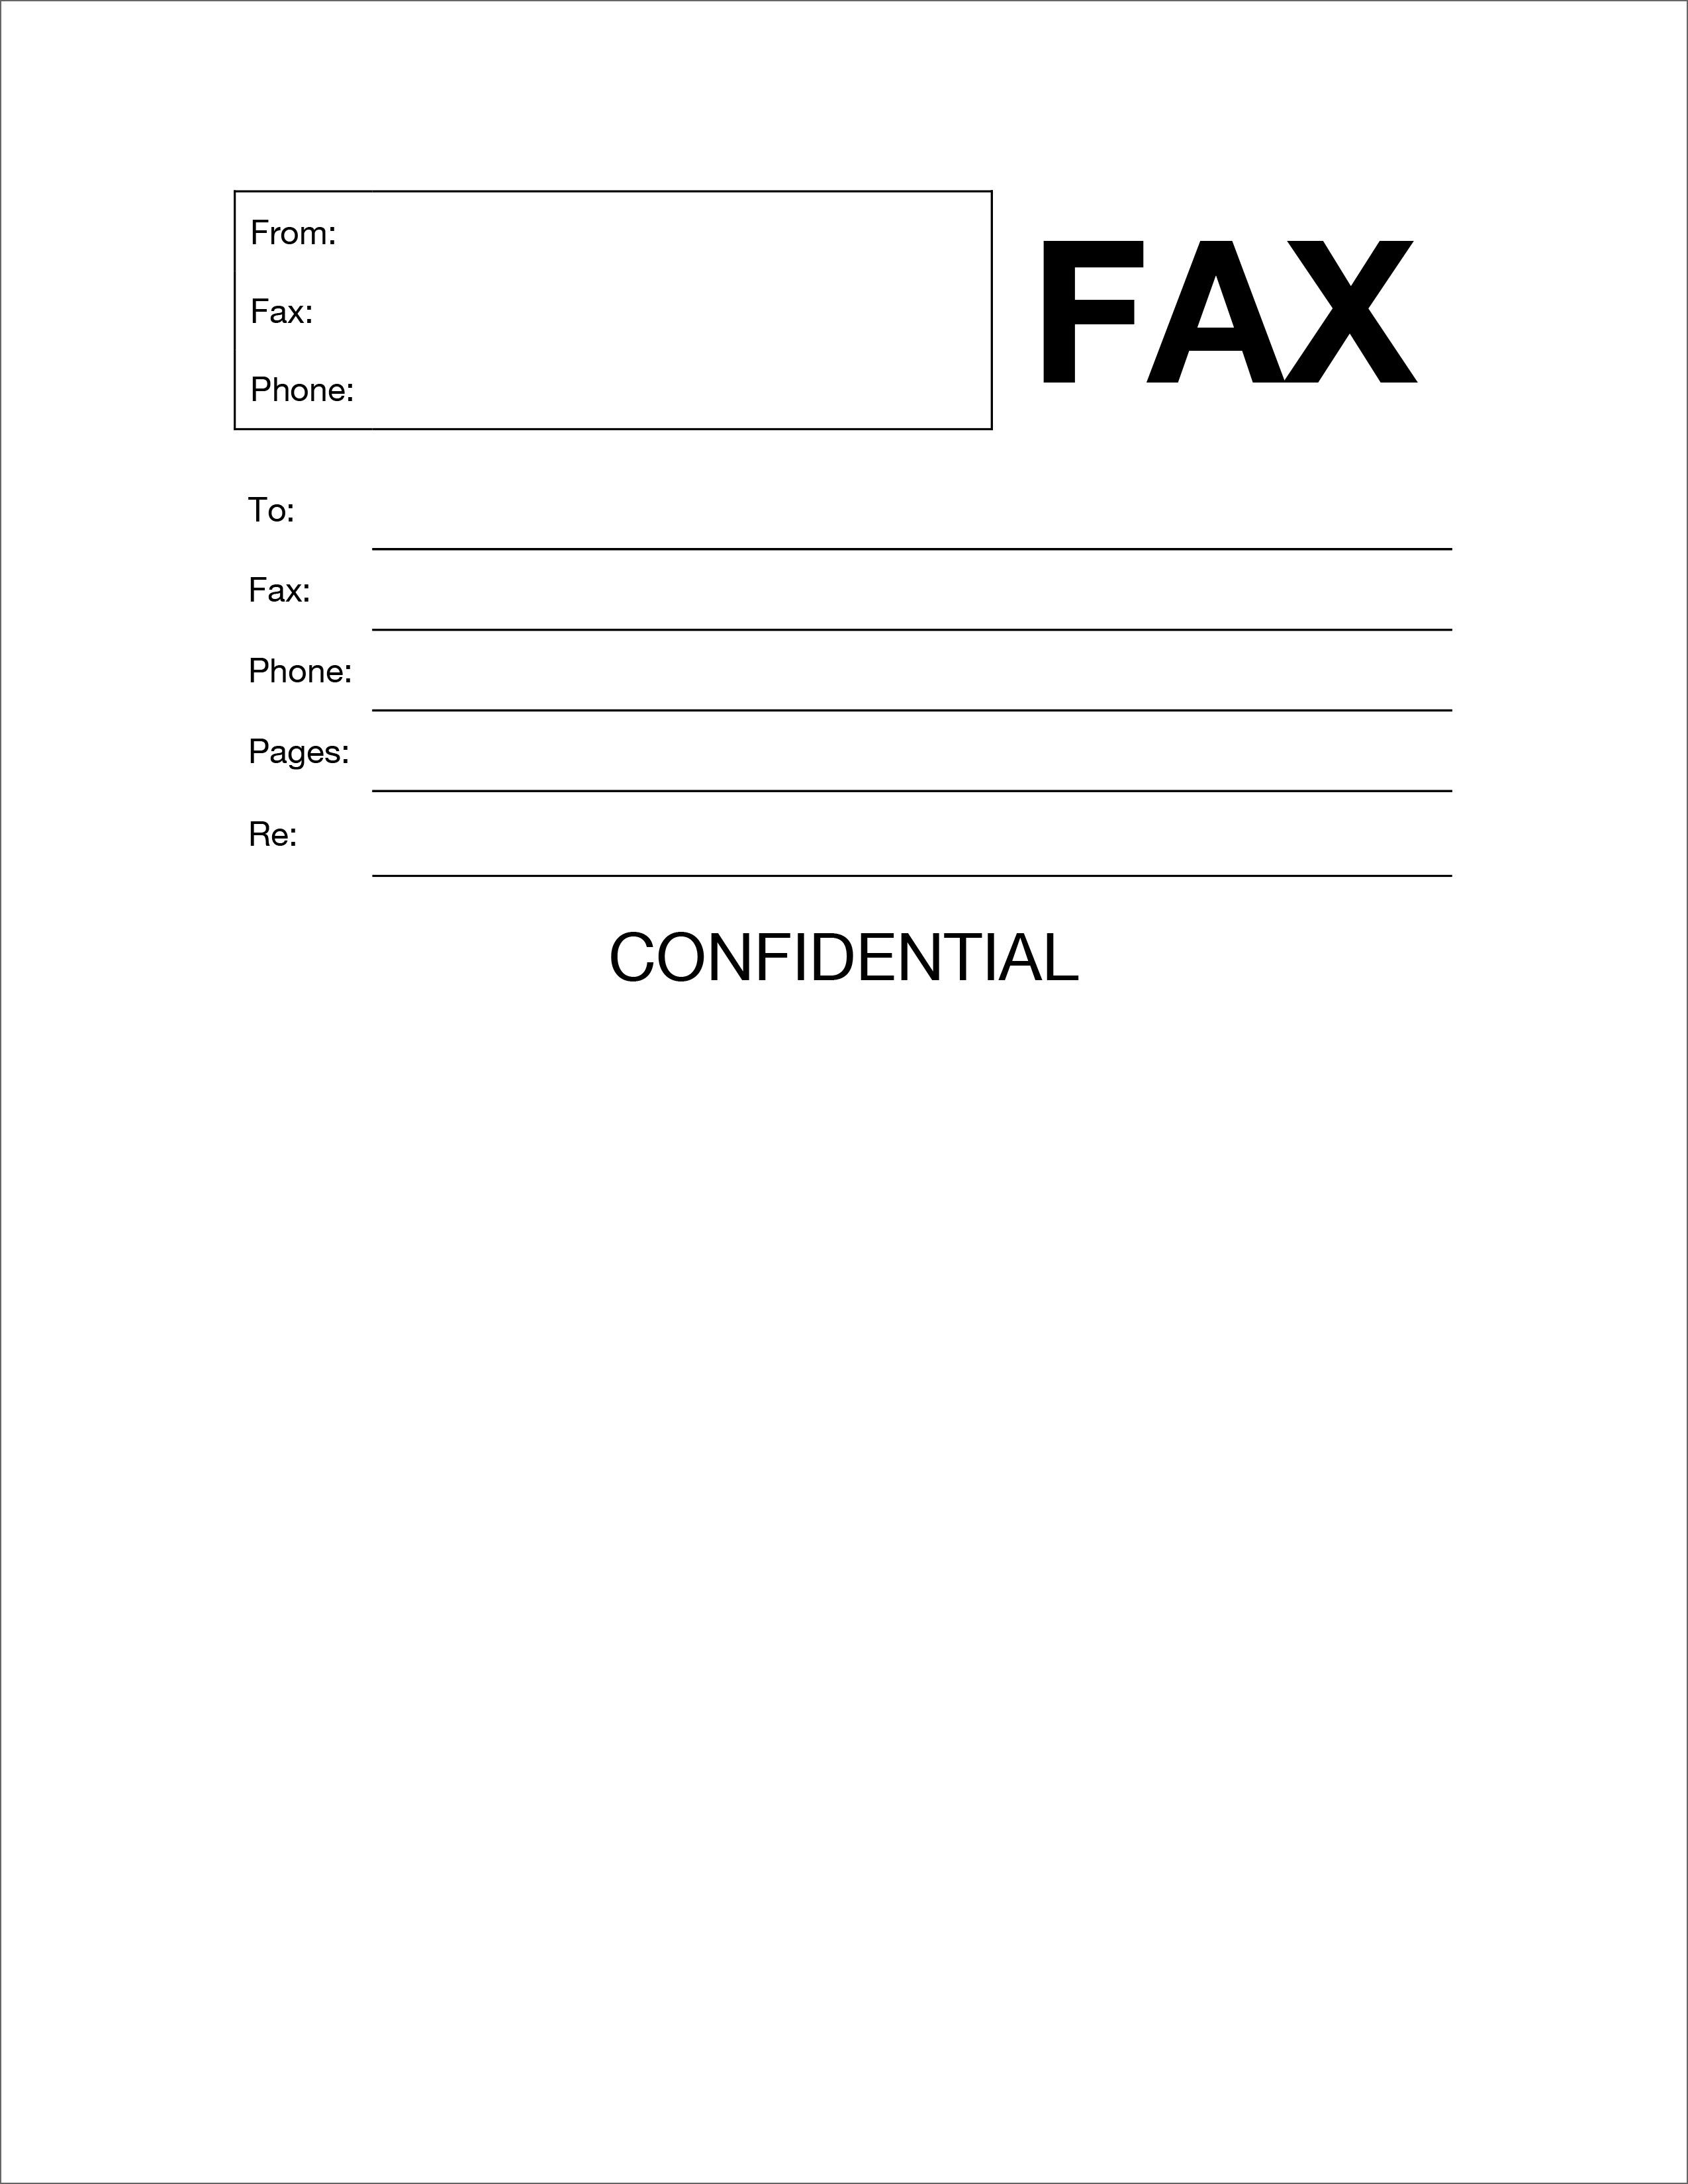 fax cover letter template microsoft word